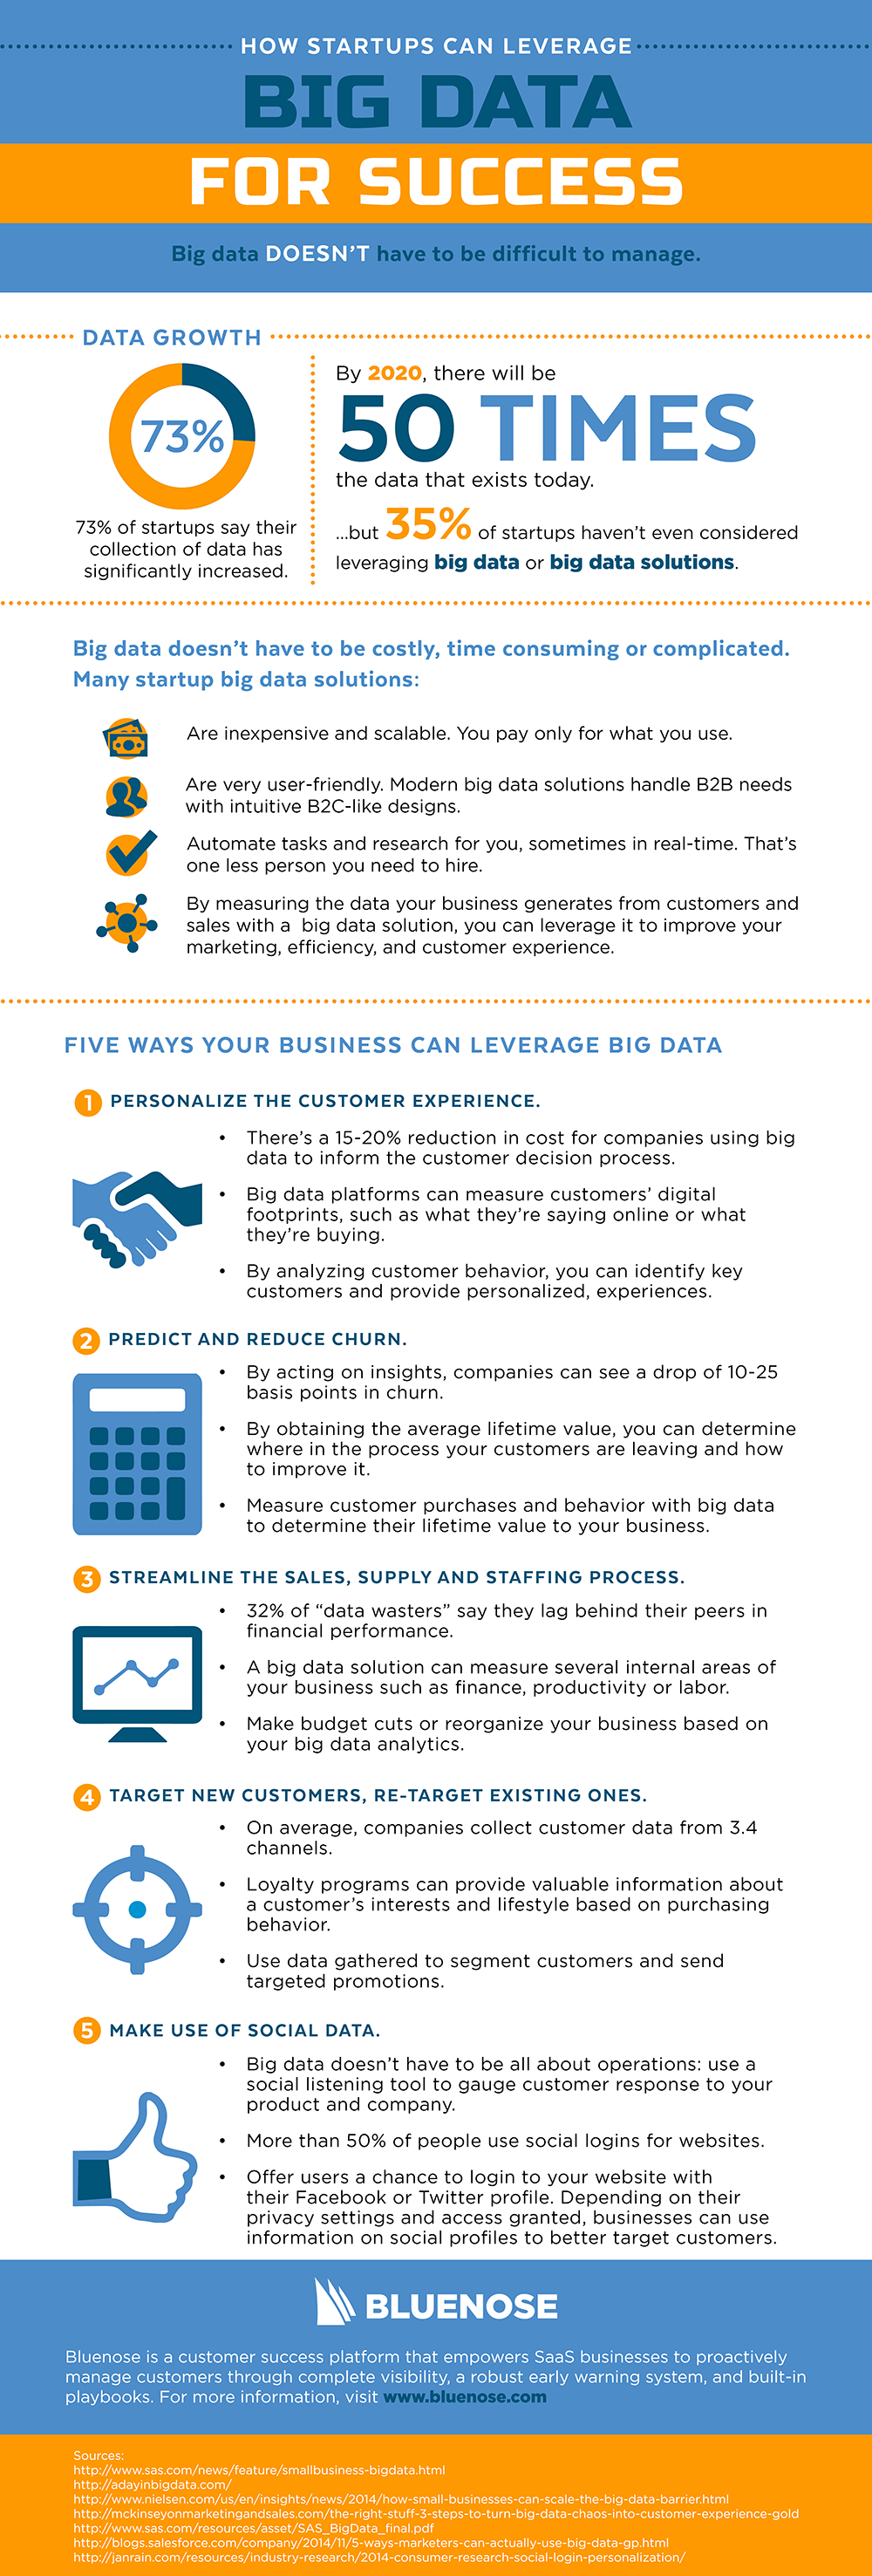 Five Ways How Startups Can Leverage Big Data